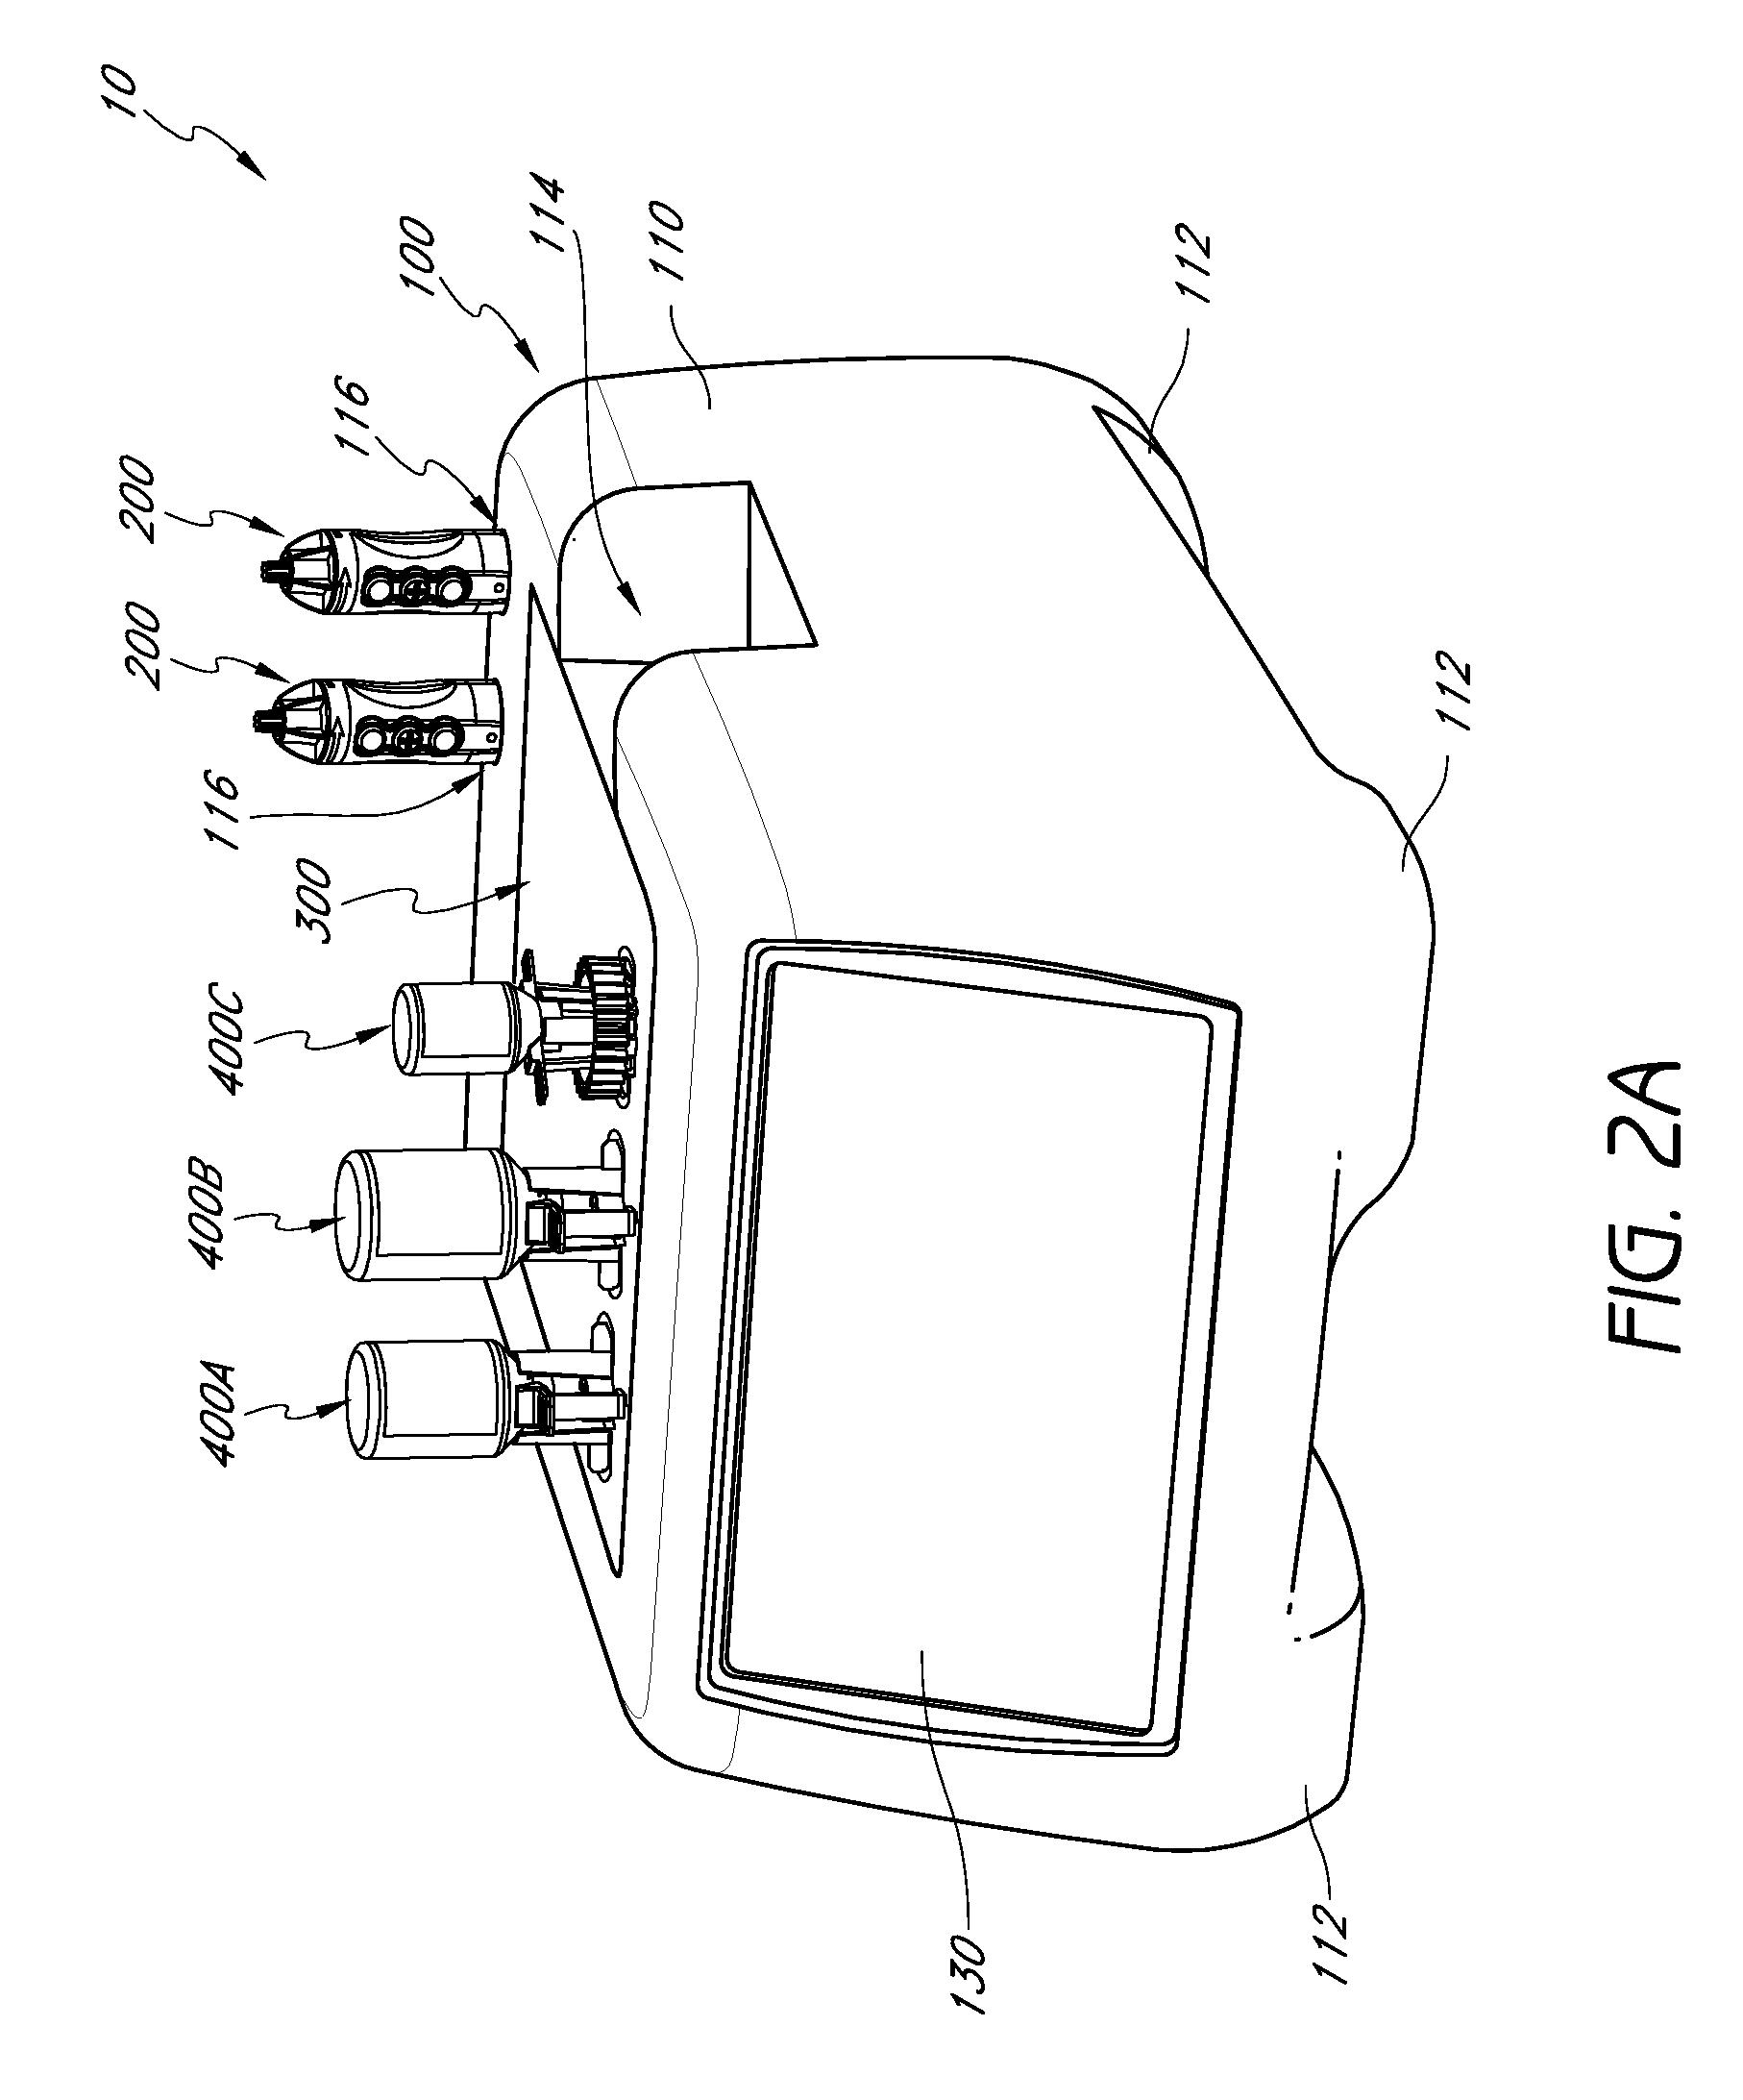 Handpiece assembly for articular injection systems